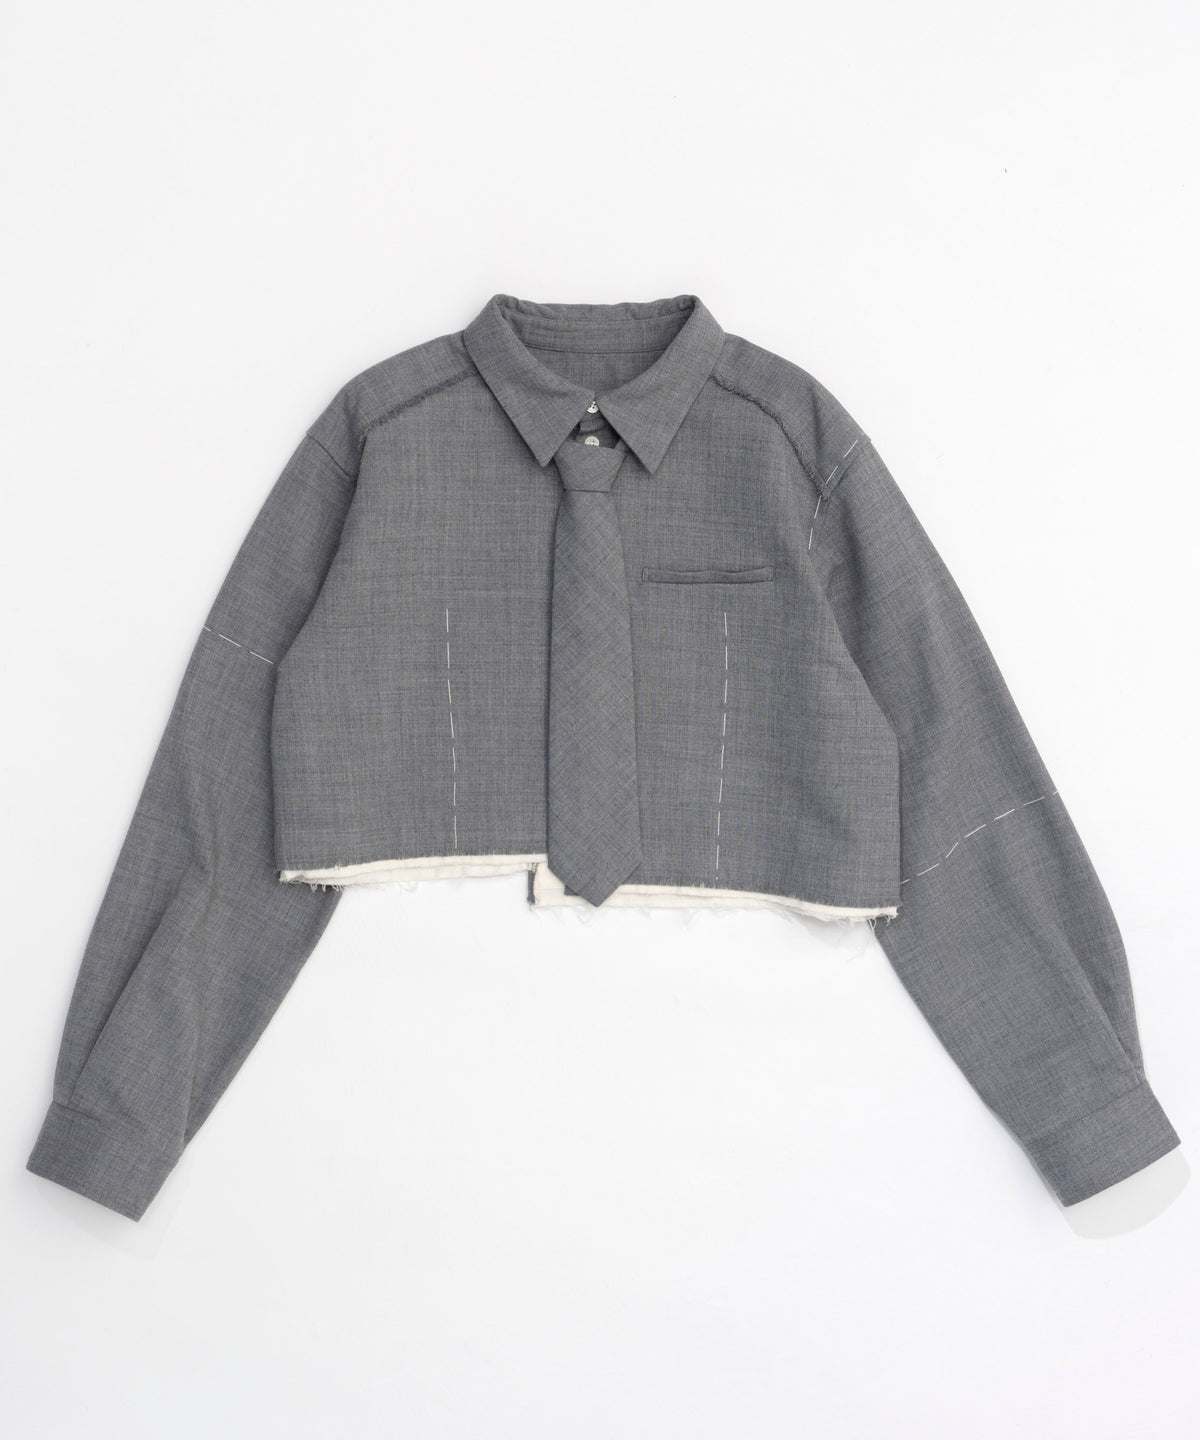 【24AUTUMN PRE-ORDER】Hand Stitch With Tie Short Length Shirt